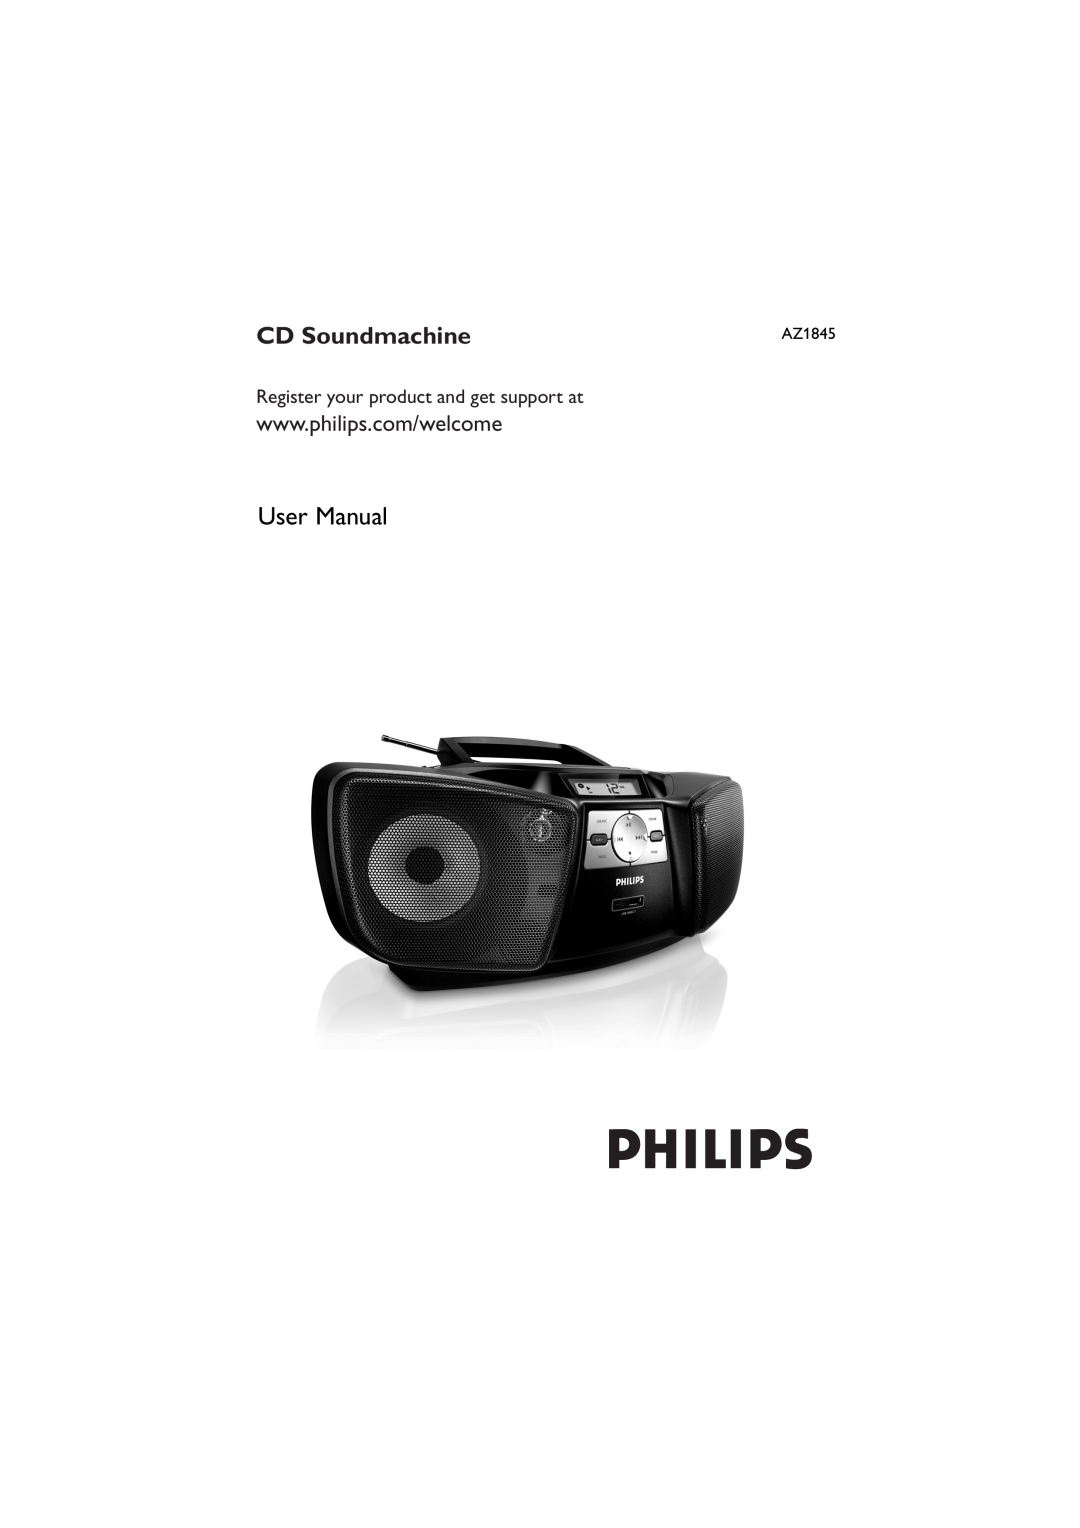 Philips AZ1845 user manual CD Soundmachine, Register your product and get support at 